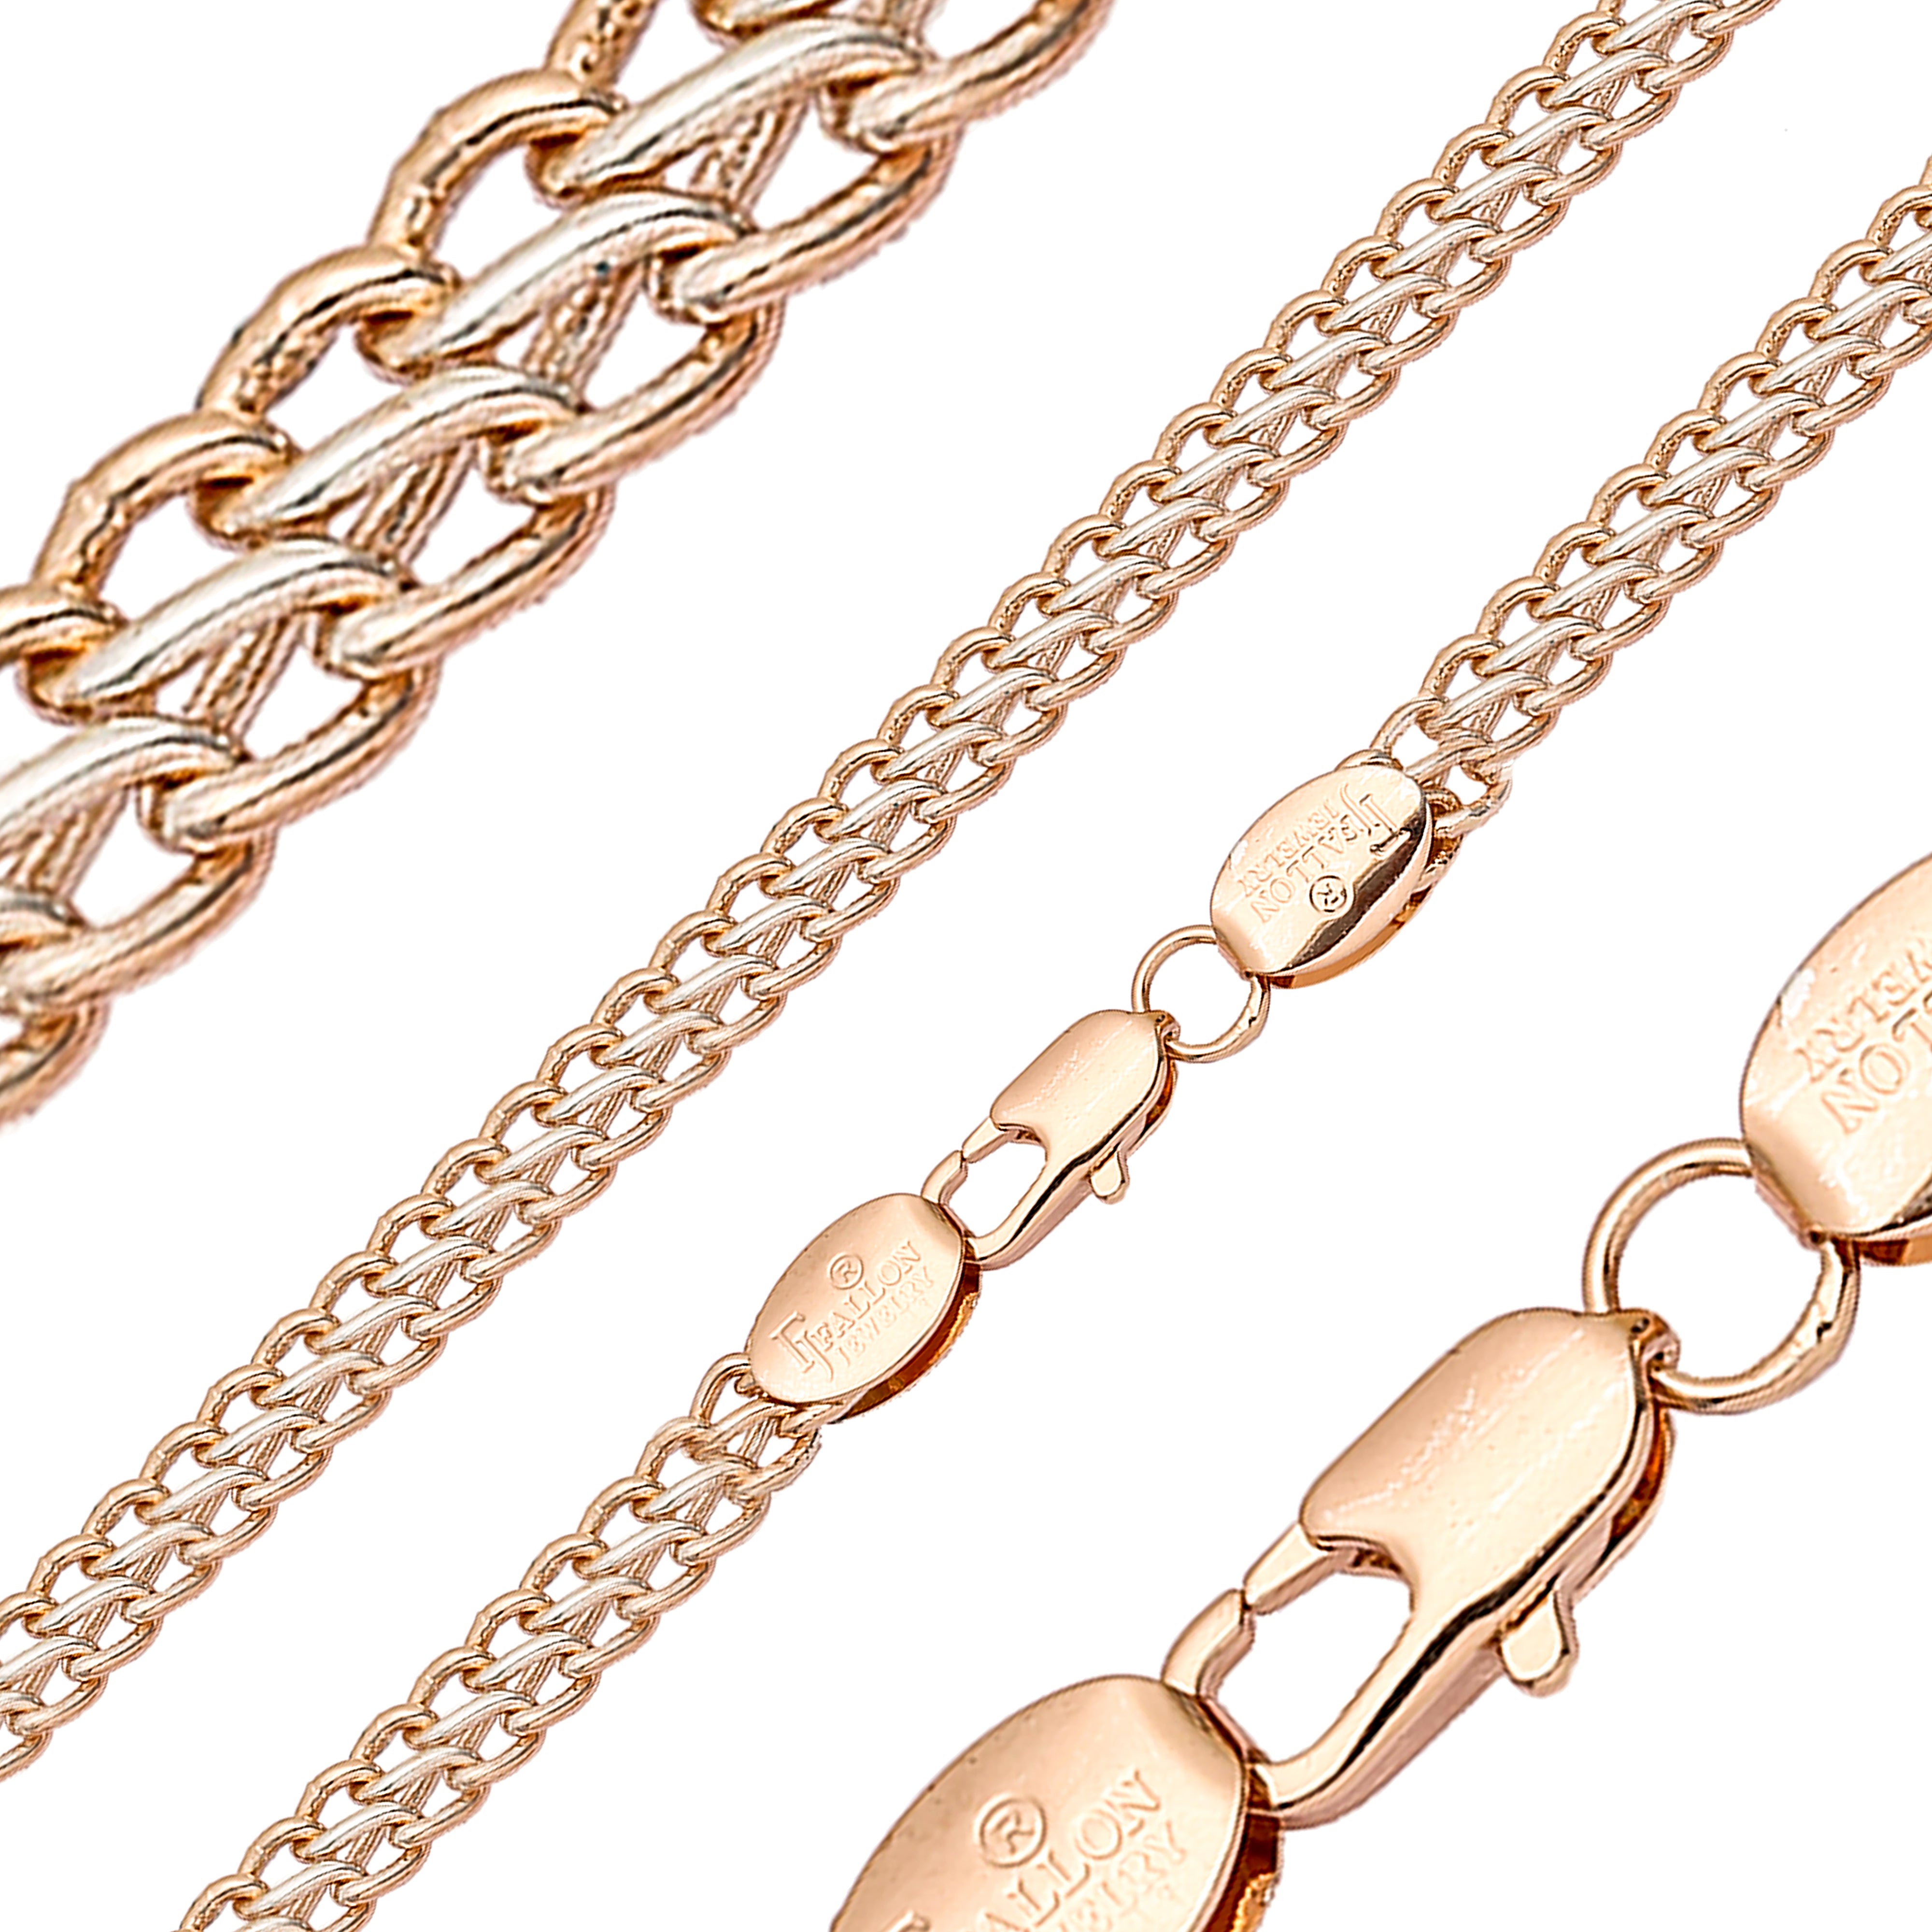 Double cable link chains plated in 14K Gold